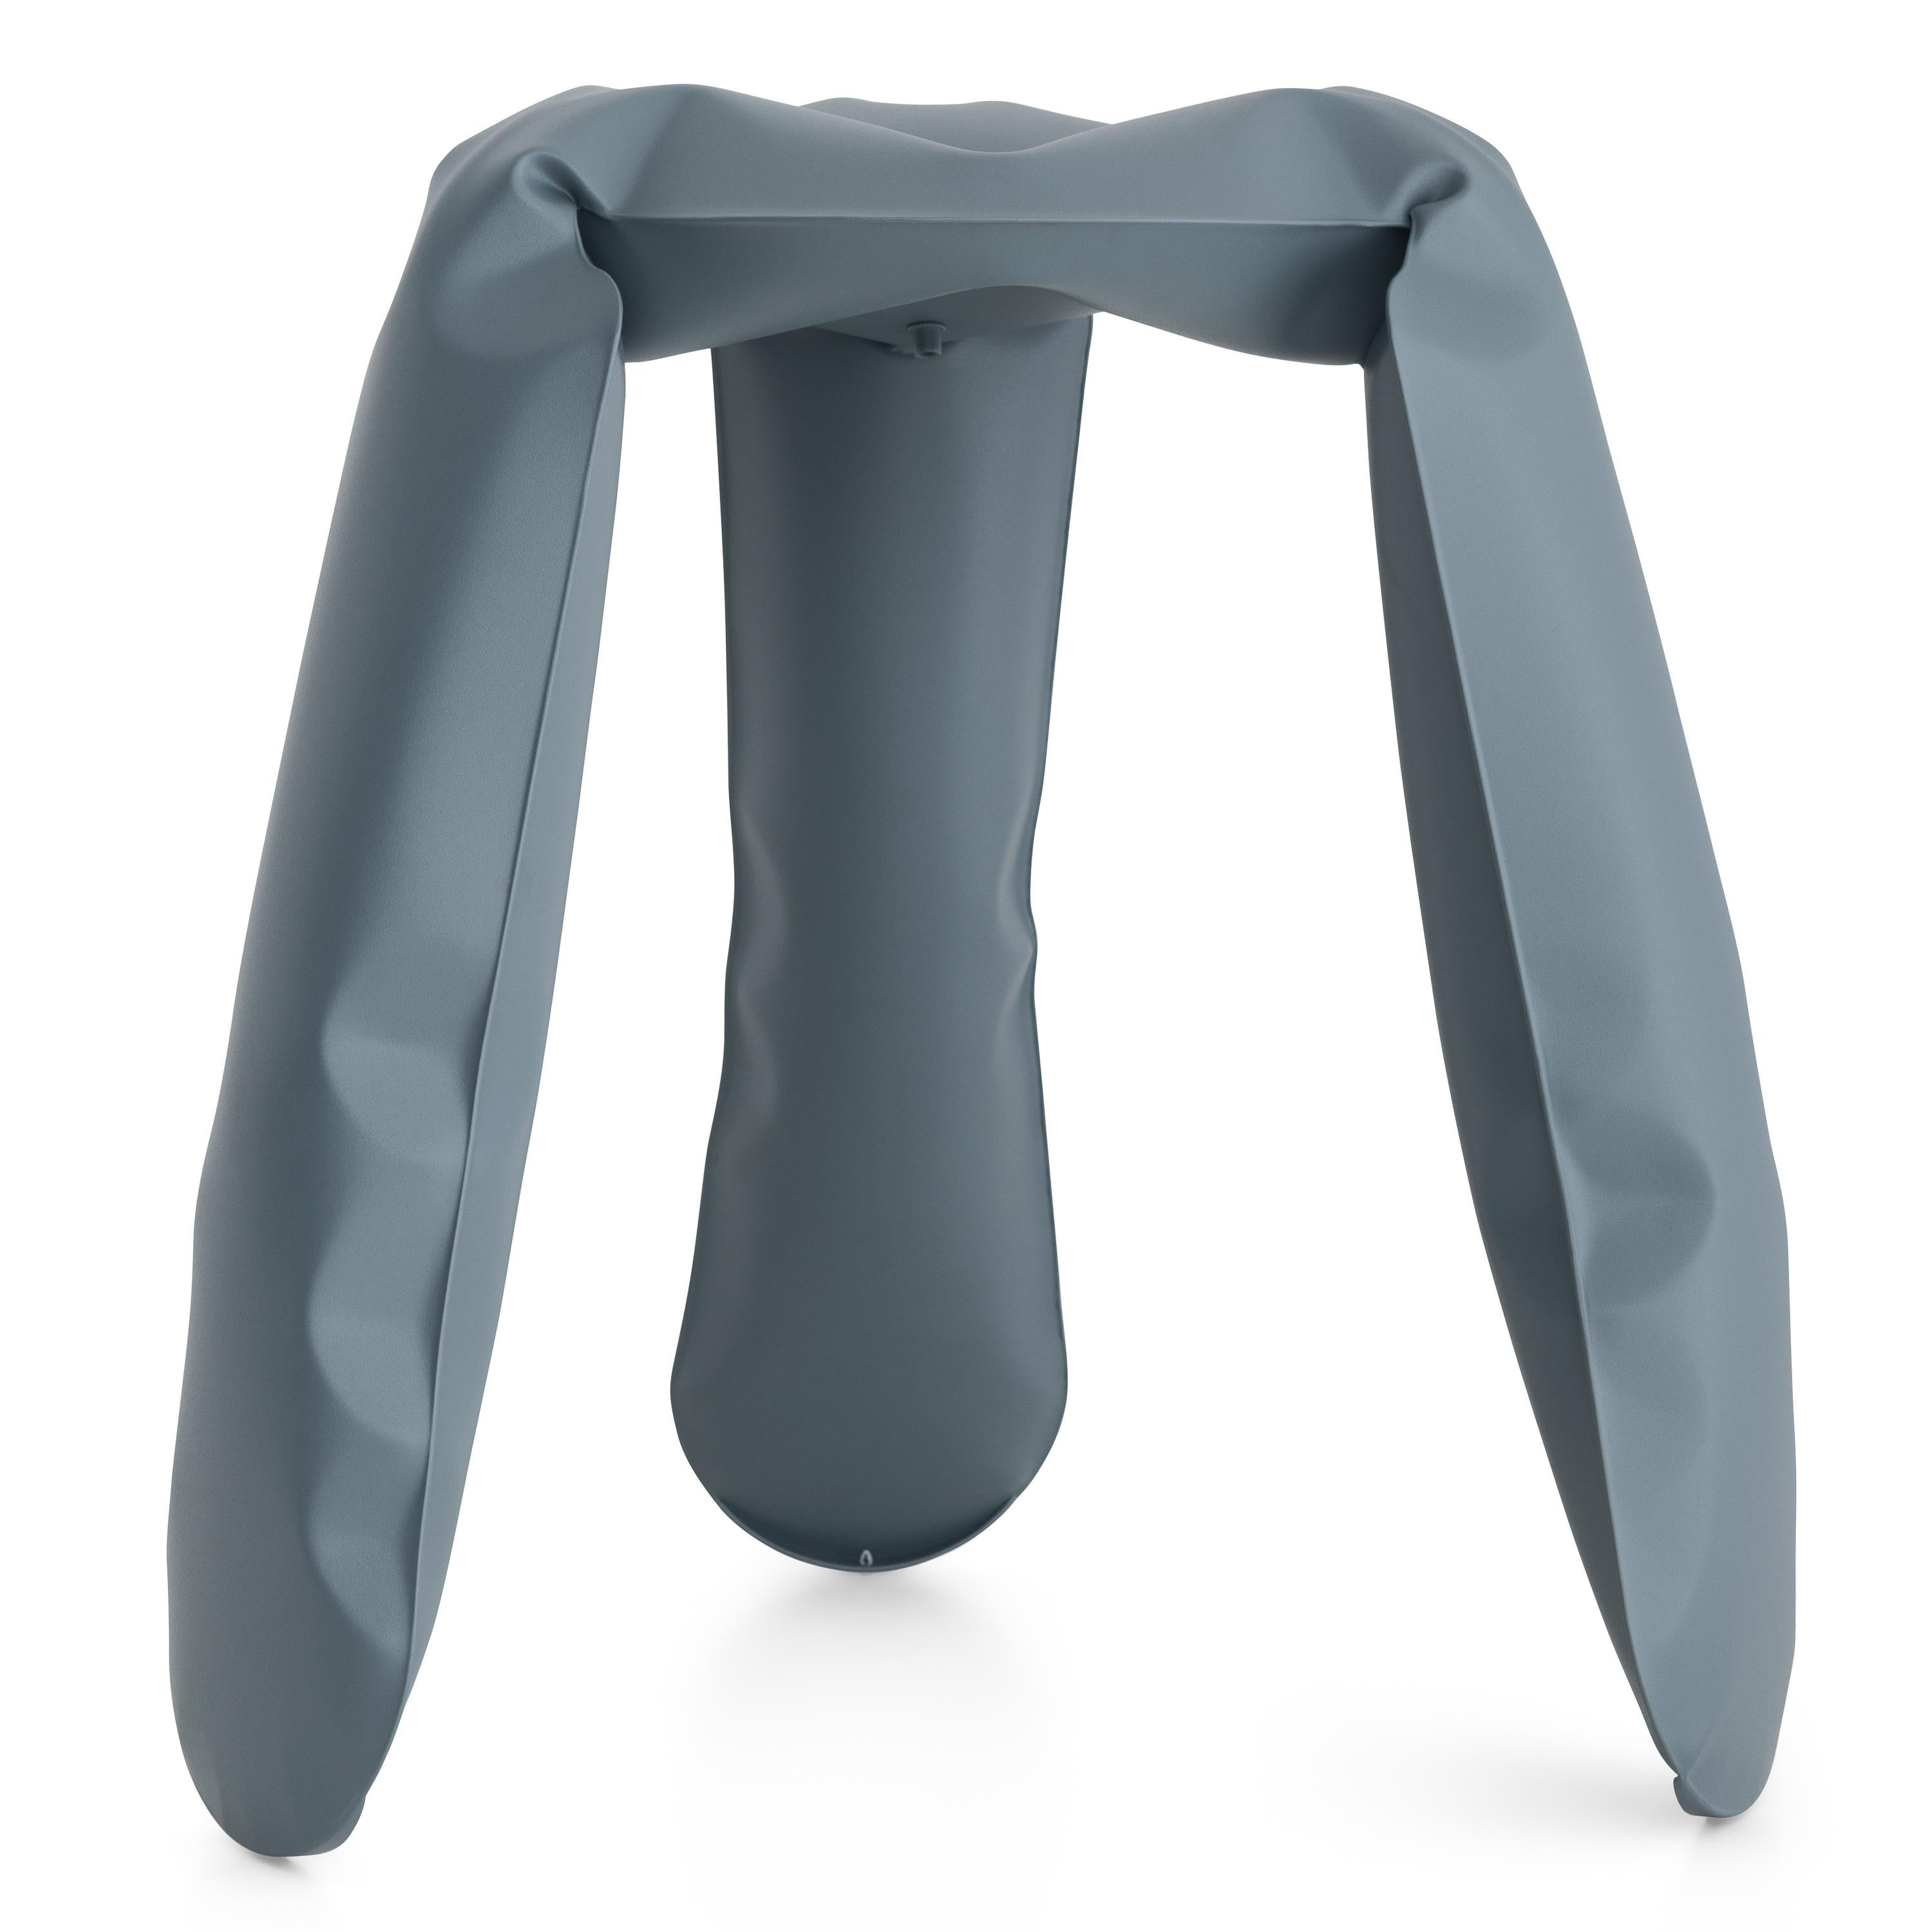 Blue grey Aluminum Standard Plopp stool by Zieta
Dimensions: D 35 x H 50 cm 
Material: Aluminum. 
Finish: Powder-coated. 
Available in colors: graphite, moss grey, umbra grey, beige grey, blue grey. available in stainless steel, aluminum, and carbon